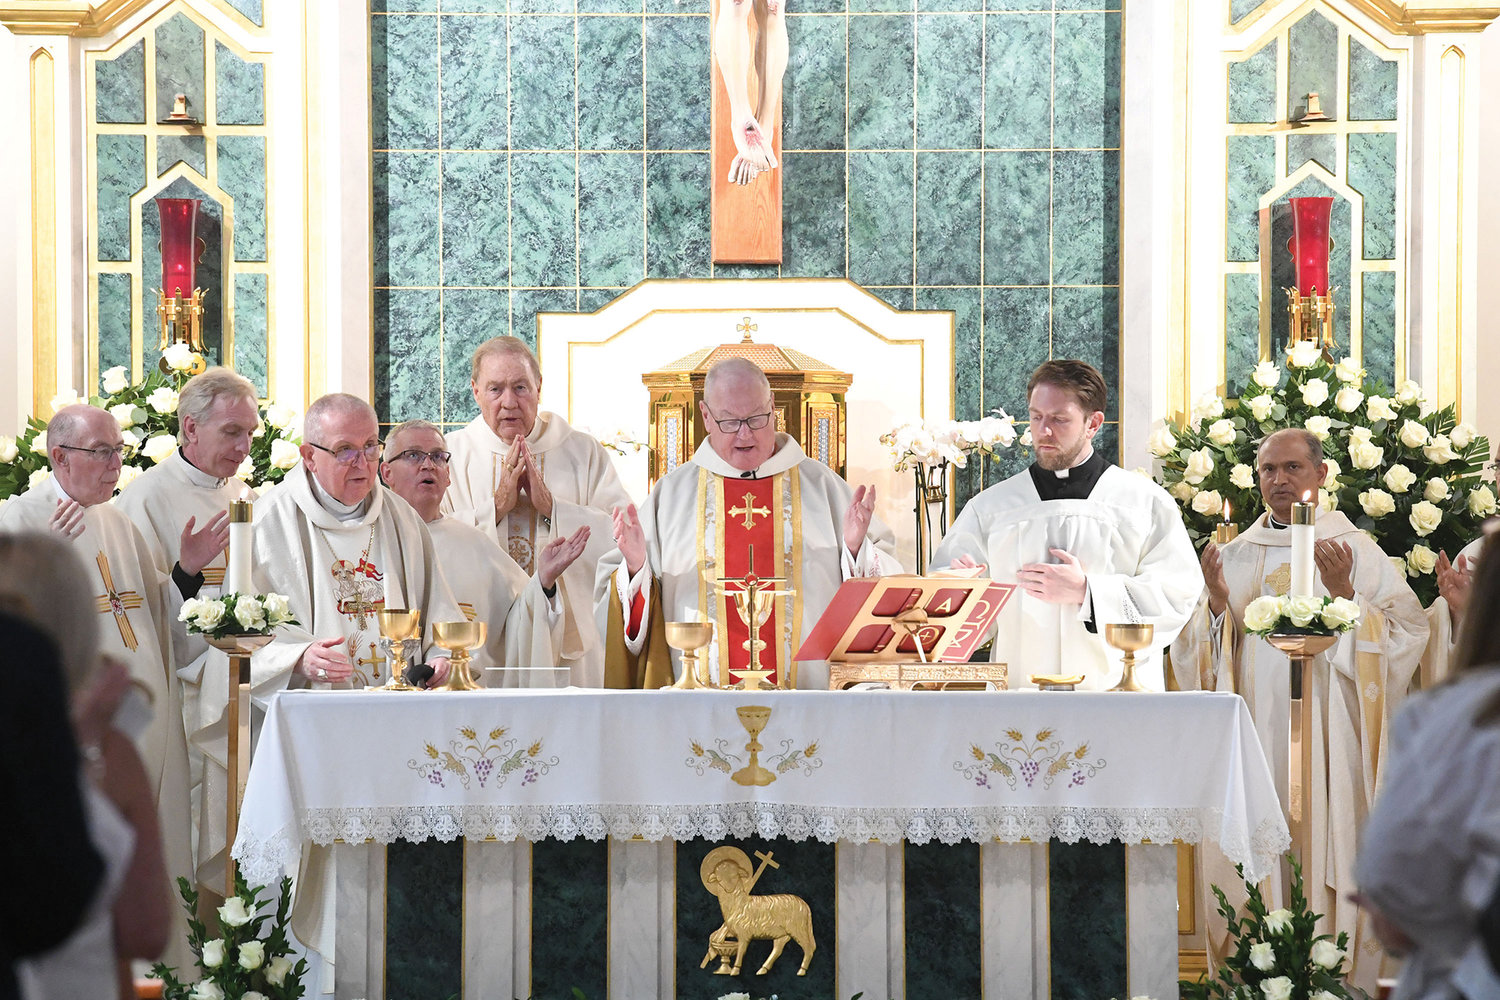 Cardinal Dolan celebrates the June 18 Centennial Mass at Our Lady Queen of Peace in the New Dorp section of Staten Island.